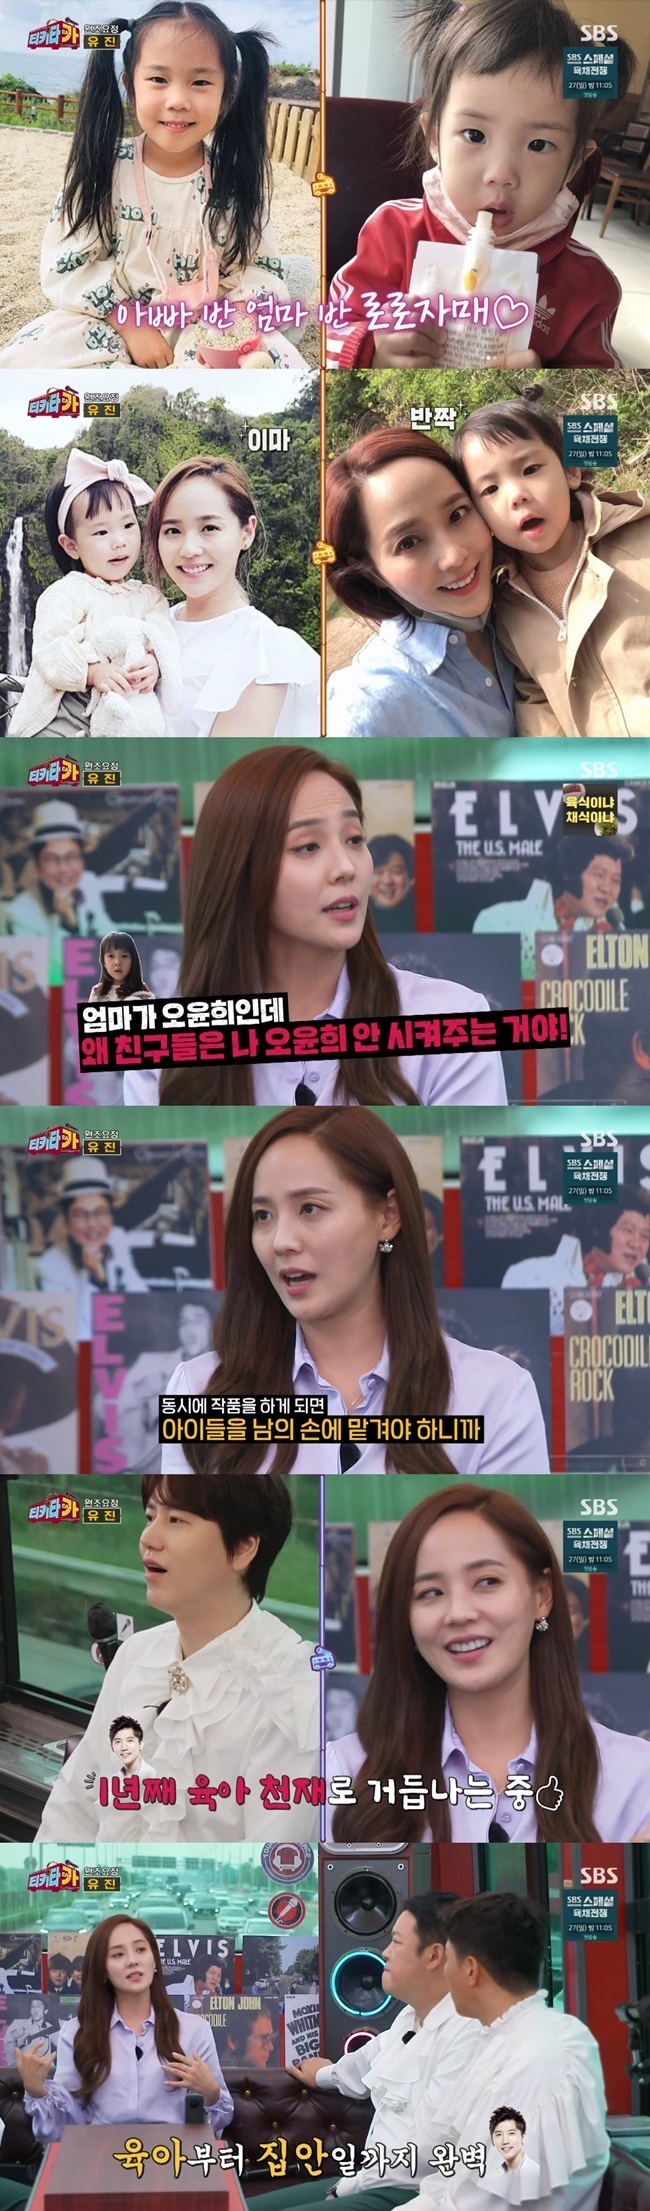 Eugene thanked Ki Tae-young, who is replacing Parenting because of his work.Eugene appeared on SBS Tikitaka broadcast on June 20.Gim Gu-ra said, The work Mr. Eugene chose after a four-year absence is Penthouse.I think it would not have been easy for Kim Soon-ok to do it for a long time. Eugene said, I saw the synopsis, but it was really fun.I thought my character was difficult and I couldnt. I was not confident, so I met him honestly and tried to refuse.I asked if it would not match Oh Yoon-hee and me, so he told me that he would like to do more, and he said he would like someone who seems to be less likely than someone who is too obvious.I had a thirst to try a new character while acting, but I was courageous at that moment. Did you discuss it with your husband, Ki Tae-young, too, said Gim Gu-ra, who said, I did. I thought I might count.Cho Kyuhyun asked, Drama is a lot of reversal, but there is a reversal that I thought was a lot, and Eugene said, It was a shock that I was the perpetrator.I didnt know until I got the script. The writer wrote it beforehand, and I did not know it, but one or two people said I was like me.We have a conversation that we do not have in other Dramas. We are very curious about ourselves. To us, Laureens mother, Eugene, laughed, Both heads resemble me, and the people who see are like twins.Cho Kyuhyun asked, Children are also mothers, fairy, not this. Eugene said, The second is still young and the first is (Actor).I never showed Penthouse, so I thought I wouldnt know. My mom said Oh Yoon-hee-ji. They said they were playing roles.I see a lot of parents, and I think it is because there are a lot of topics. Eugene - Ki Tae-young said they would not do dual-income before marriage, meaning they would not do work at the same time.At the same time, you have to leave your children to others. My brother has not been working for a year.Cho Kyuhyun said, To us and Laurin are like their mother, so they like dancing and singing a lot, and Eugene said, I really like it.Im so sick when I just get music, she laughed.Eugene, who said he was a BTS fan, told an anecdote about the song after singing Poetry for Small Things.Eugene said, Lorin needs time to adapt to the car seat, and when she plays this song, she responds, so she has infinite repetition.When Cho Kyuhyun asked about the popularity at the time of SES activities, Mung Mun-seok recalled, If SES comes, a few thousand people went and cheered.Eugene, who was living in Guam, said, H.O.T. came to the music video with Guam, and I really wanted to see the news and went to the airport.I was 17 and that was my debut year. I came to Guam about Spring and met Mr. Lee Soo-man and gave me contact information.I contacted SM in Bangbae-dong and said that I was willing to go. I watched the dance video and practiced during the summer vacation and made my debut in November of that year. 